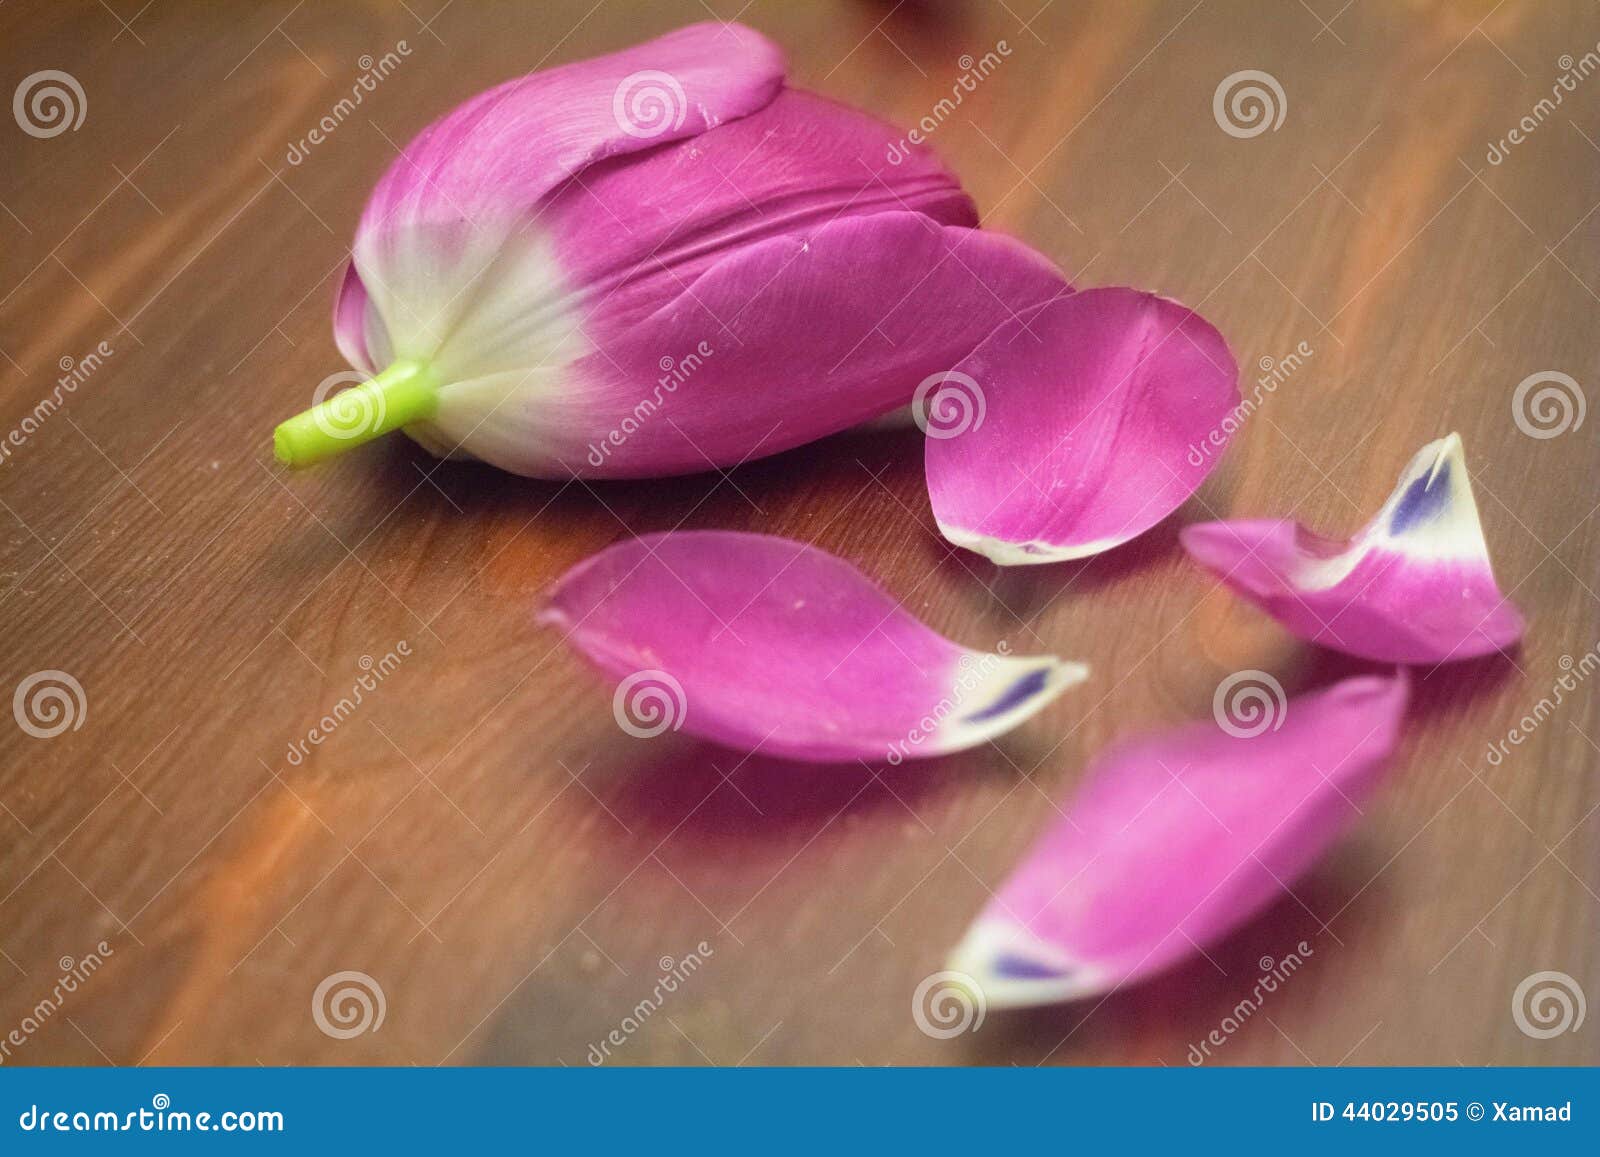 petals on table